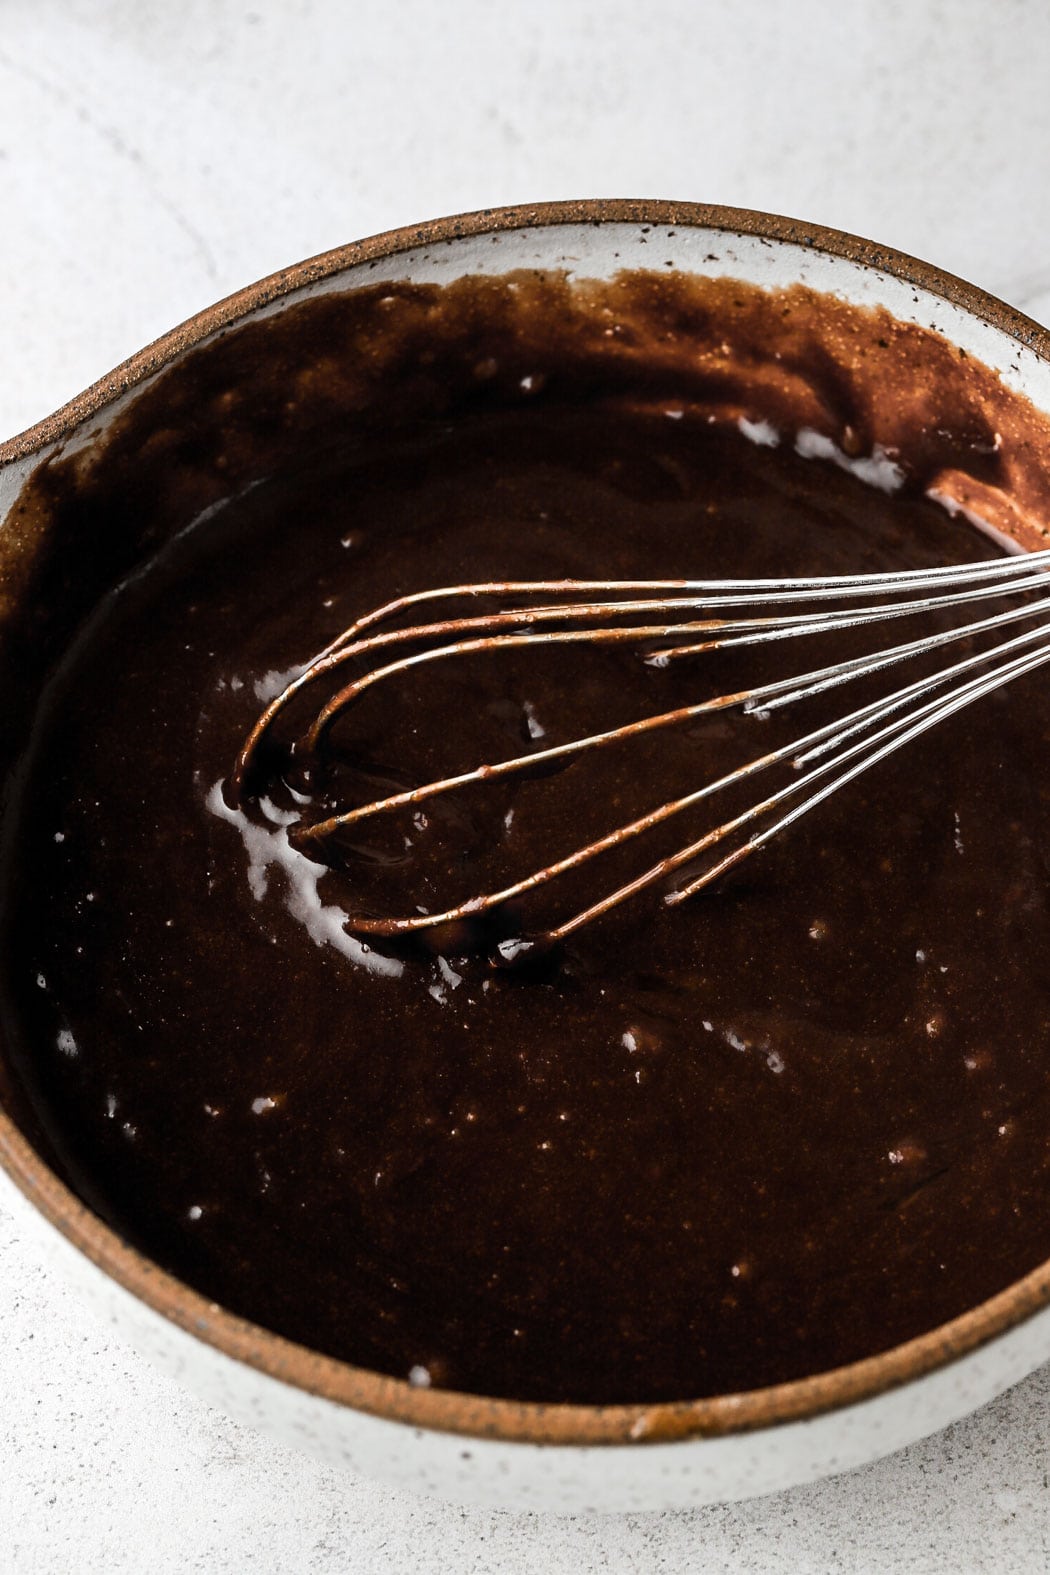 whisk in the melted butter and chocolate